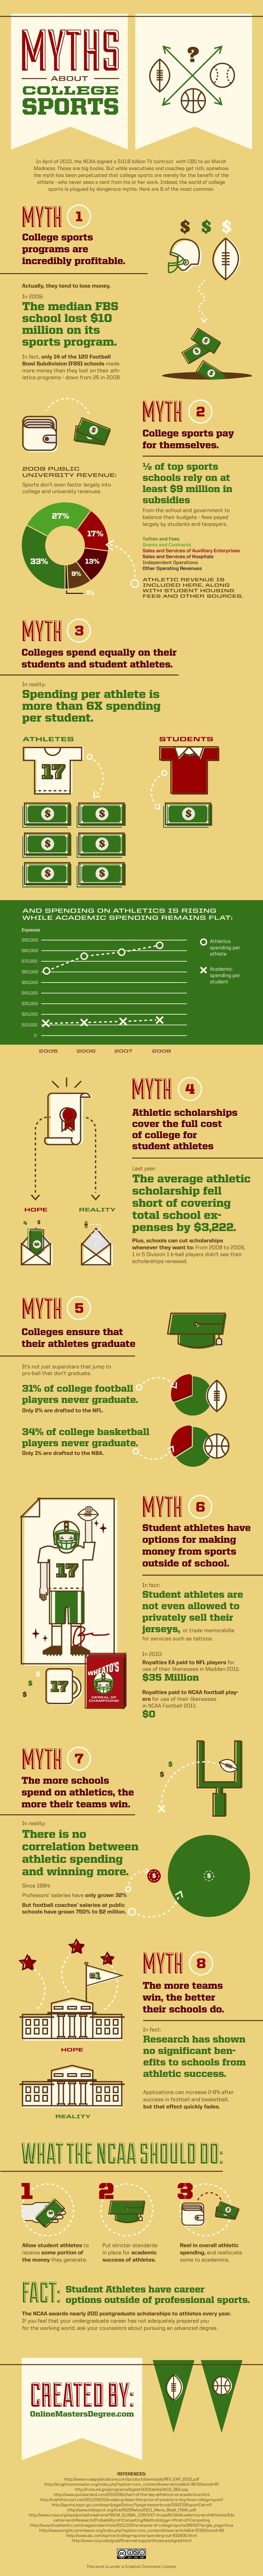 Myths about College Sports (Infographic)